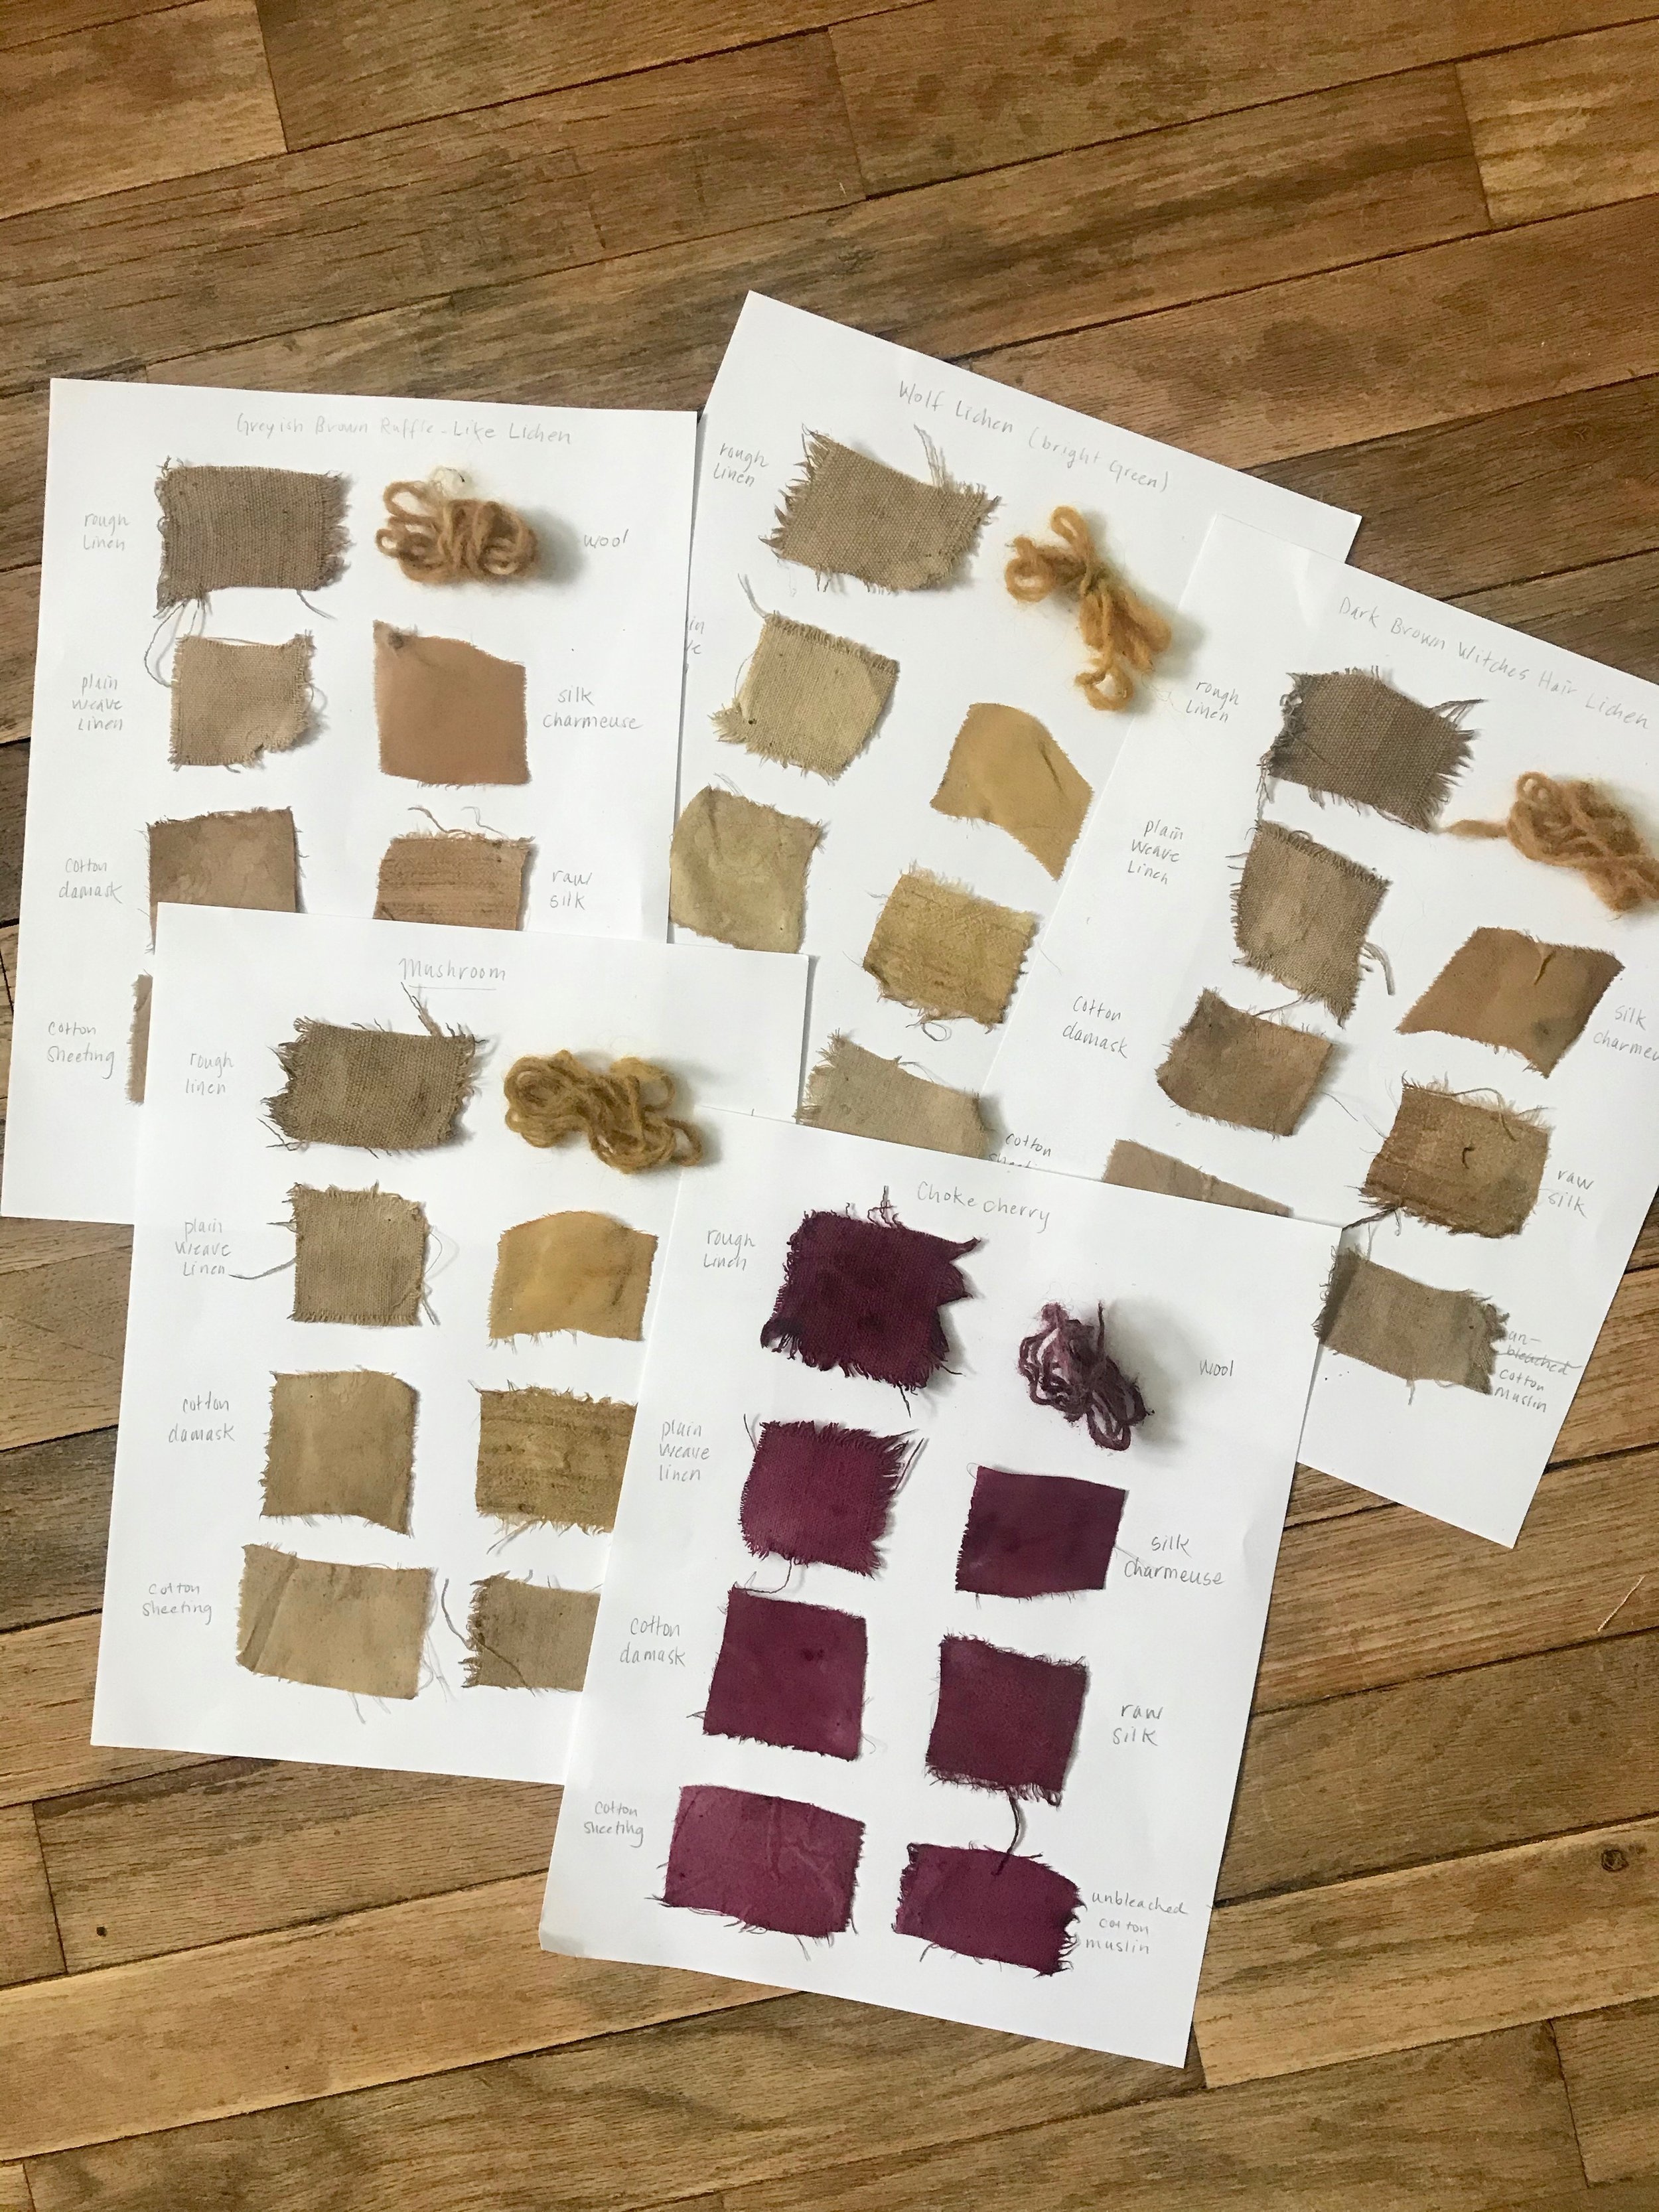 10-dyed-sample swatches-faessel-colab-2020.jpeg